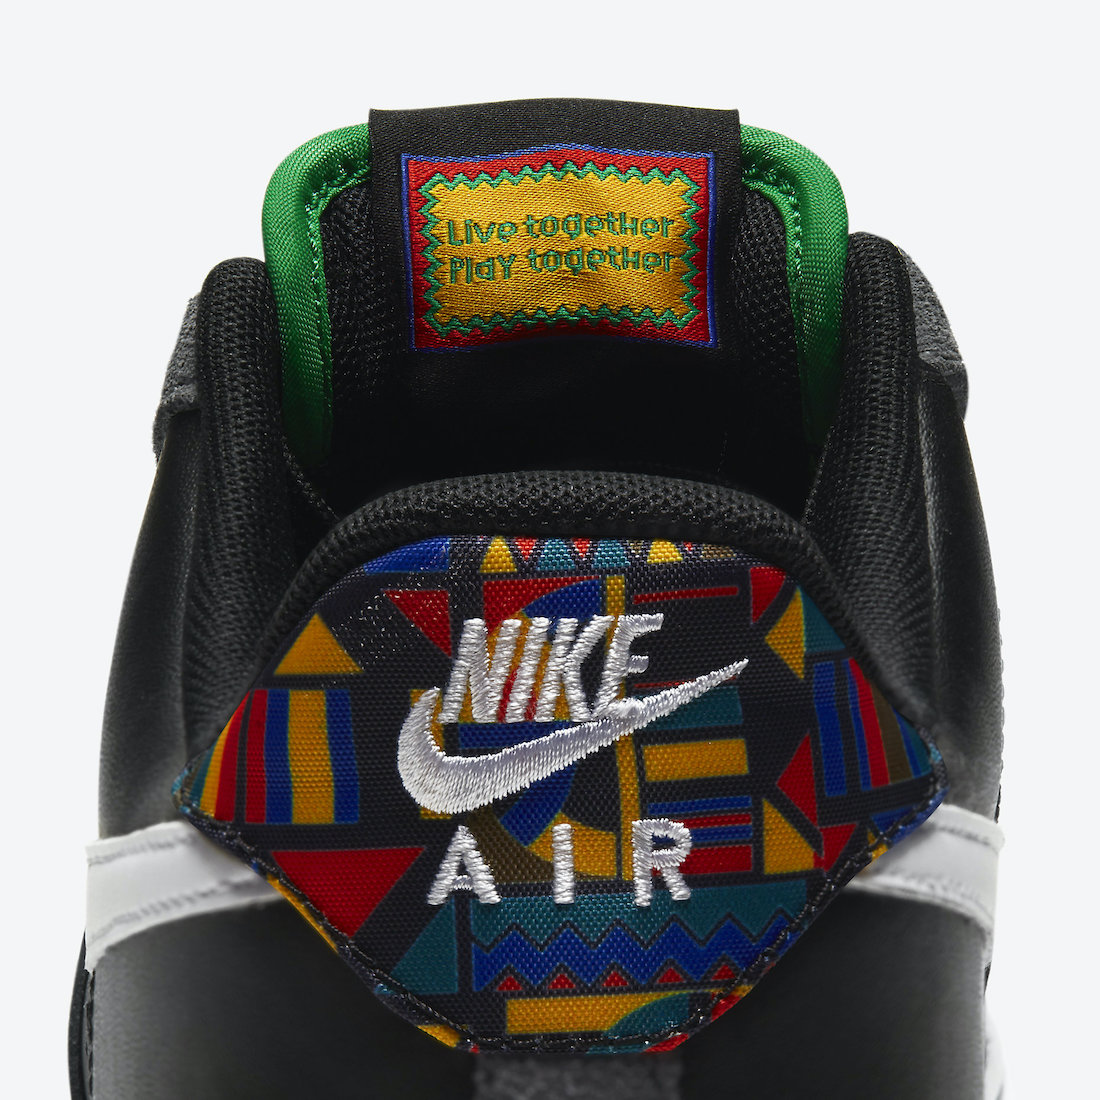 0c9943a6-nike-air-force-1-live-together-play-together-urban-jungle-gym-dc1483-001-release-date-8